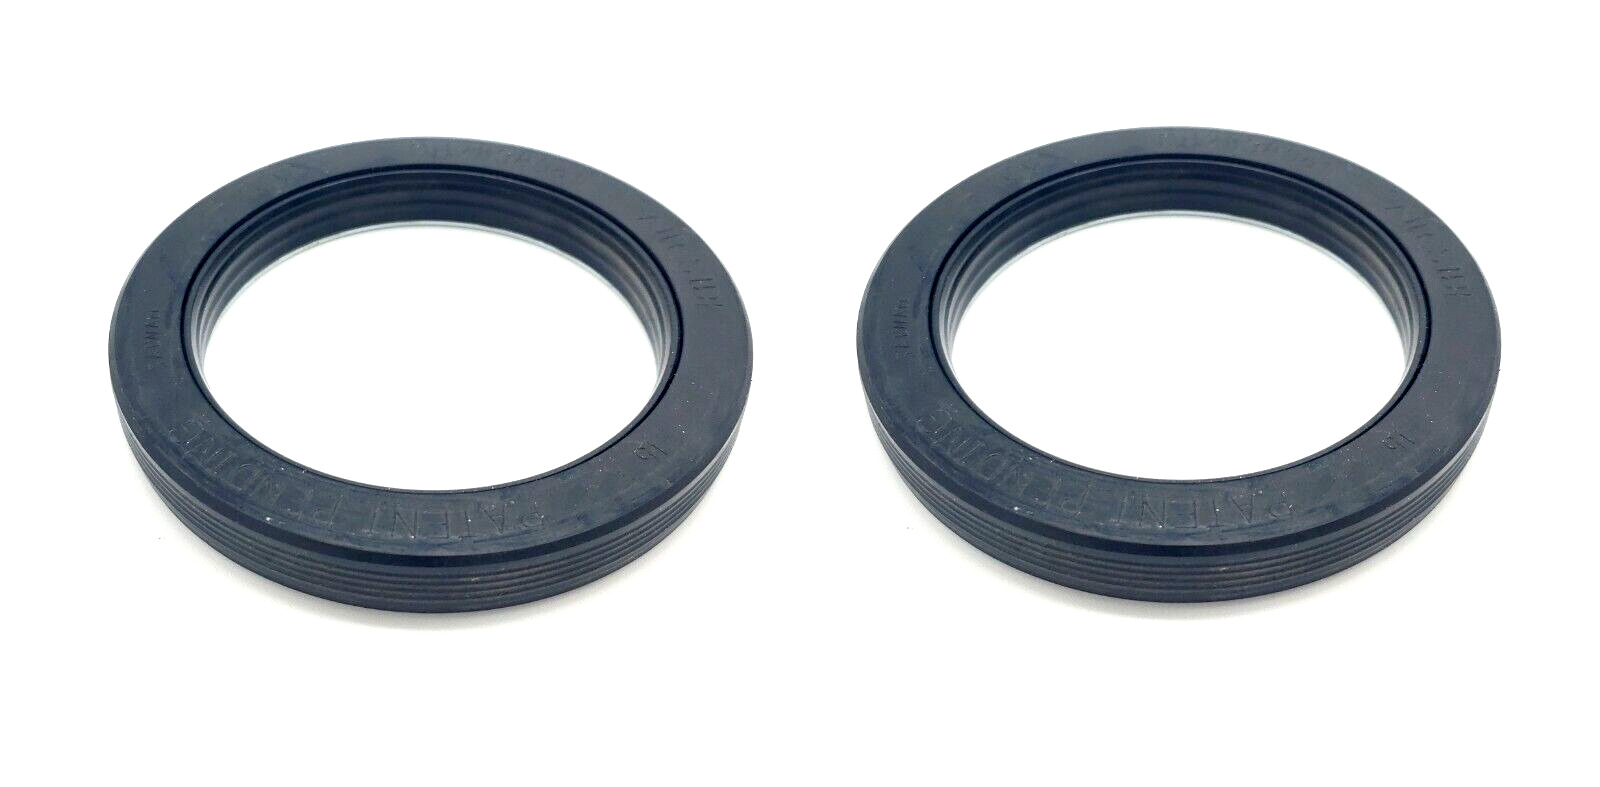 2x Oil Seal Replacement for Dexter 10-51 Grease 9K 10K GD Trailer Axle 7700081